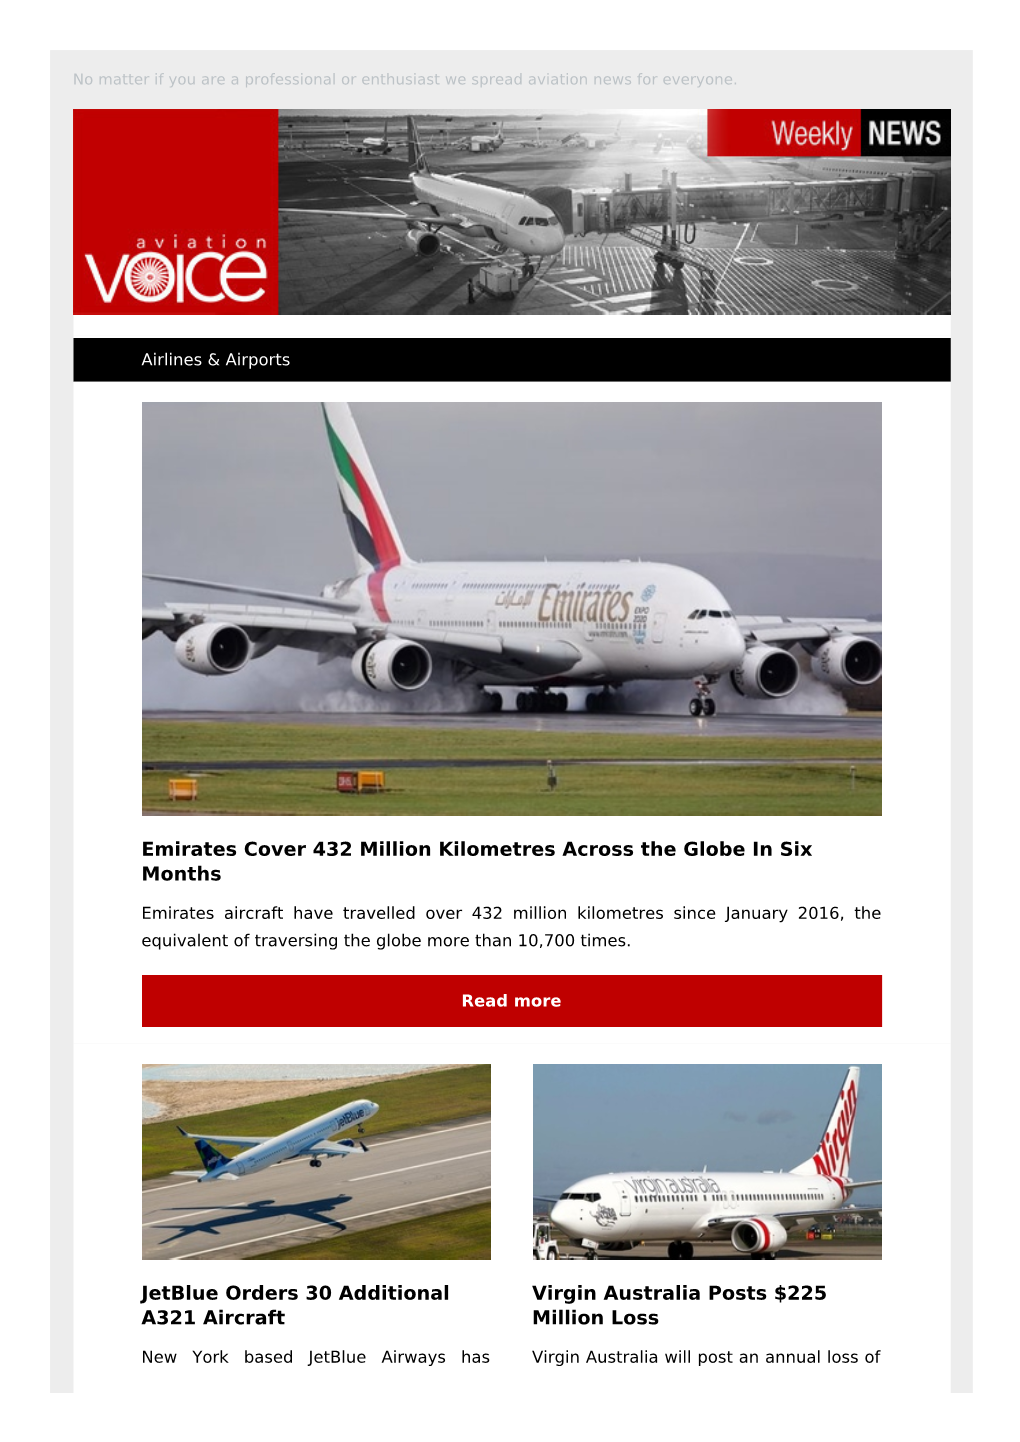 Emirates Cover 432 Million Kilometres Across the Globe in Six Months